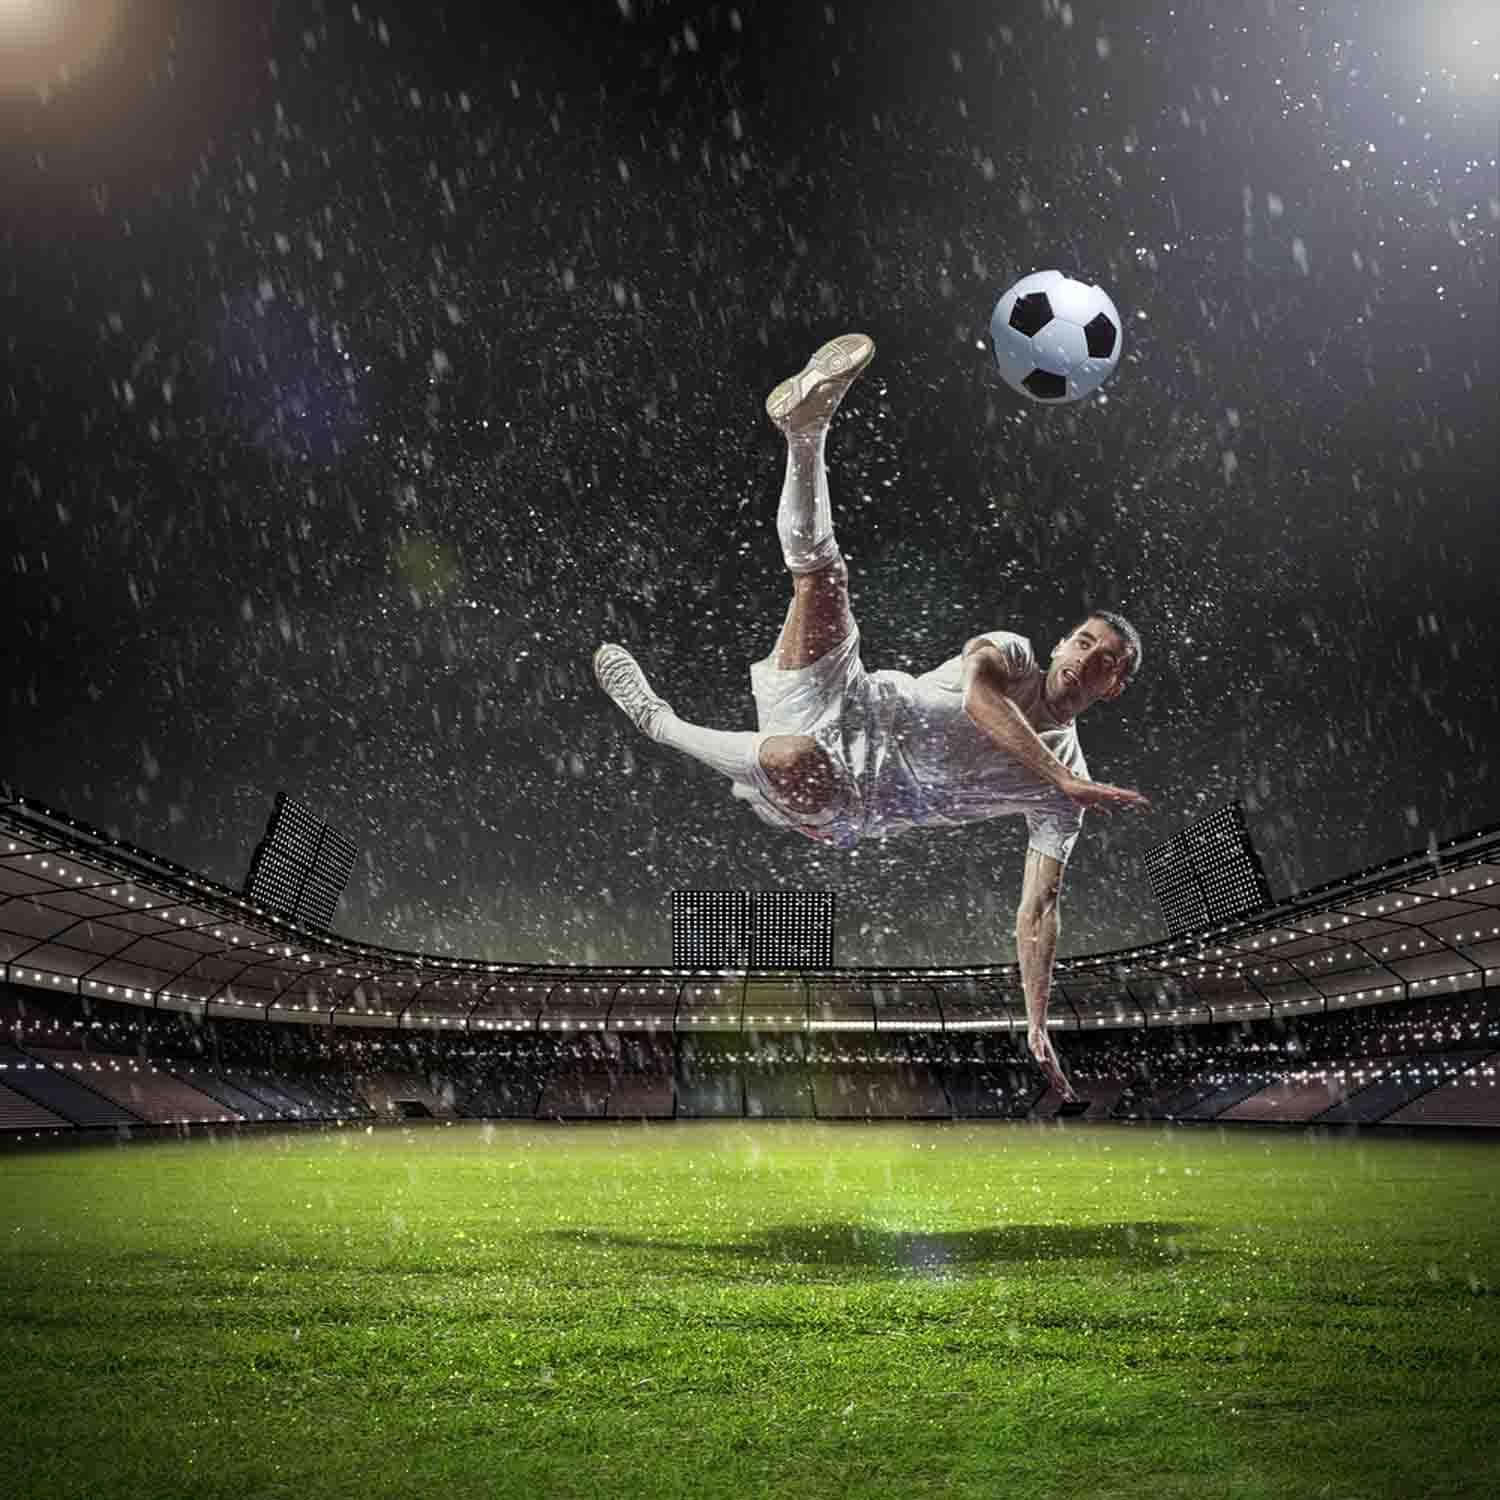 Soccer aesthic  Soccer pictures Soccer backgrounds Soccer photography